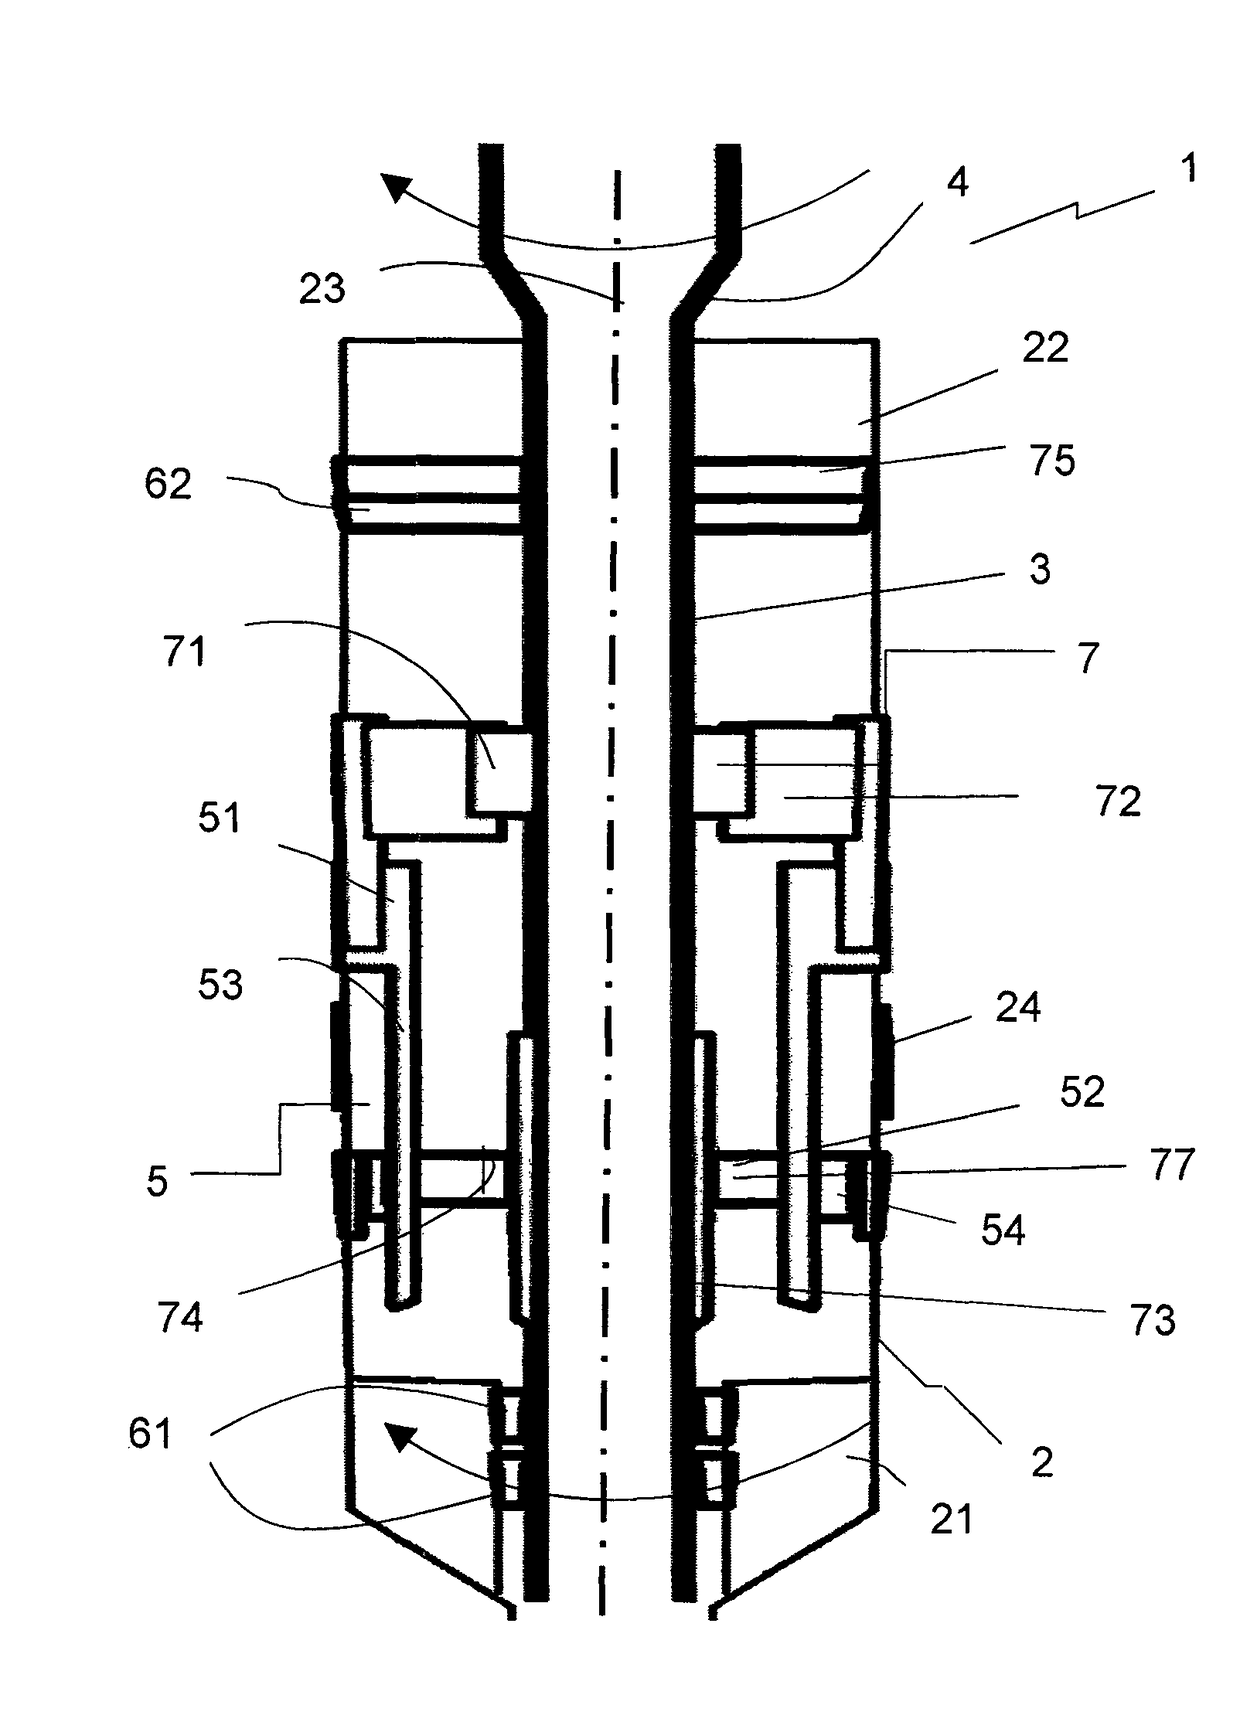 Tool for selectively connecting or disconnecting components of a downhole workstring